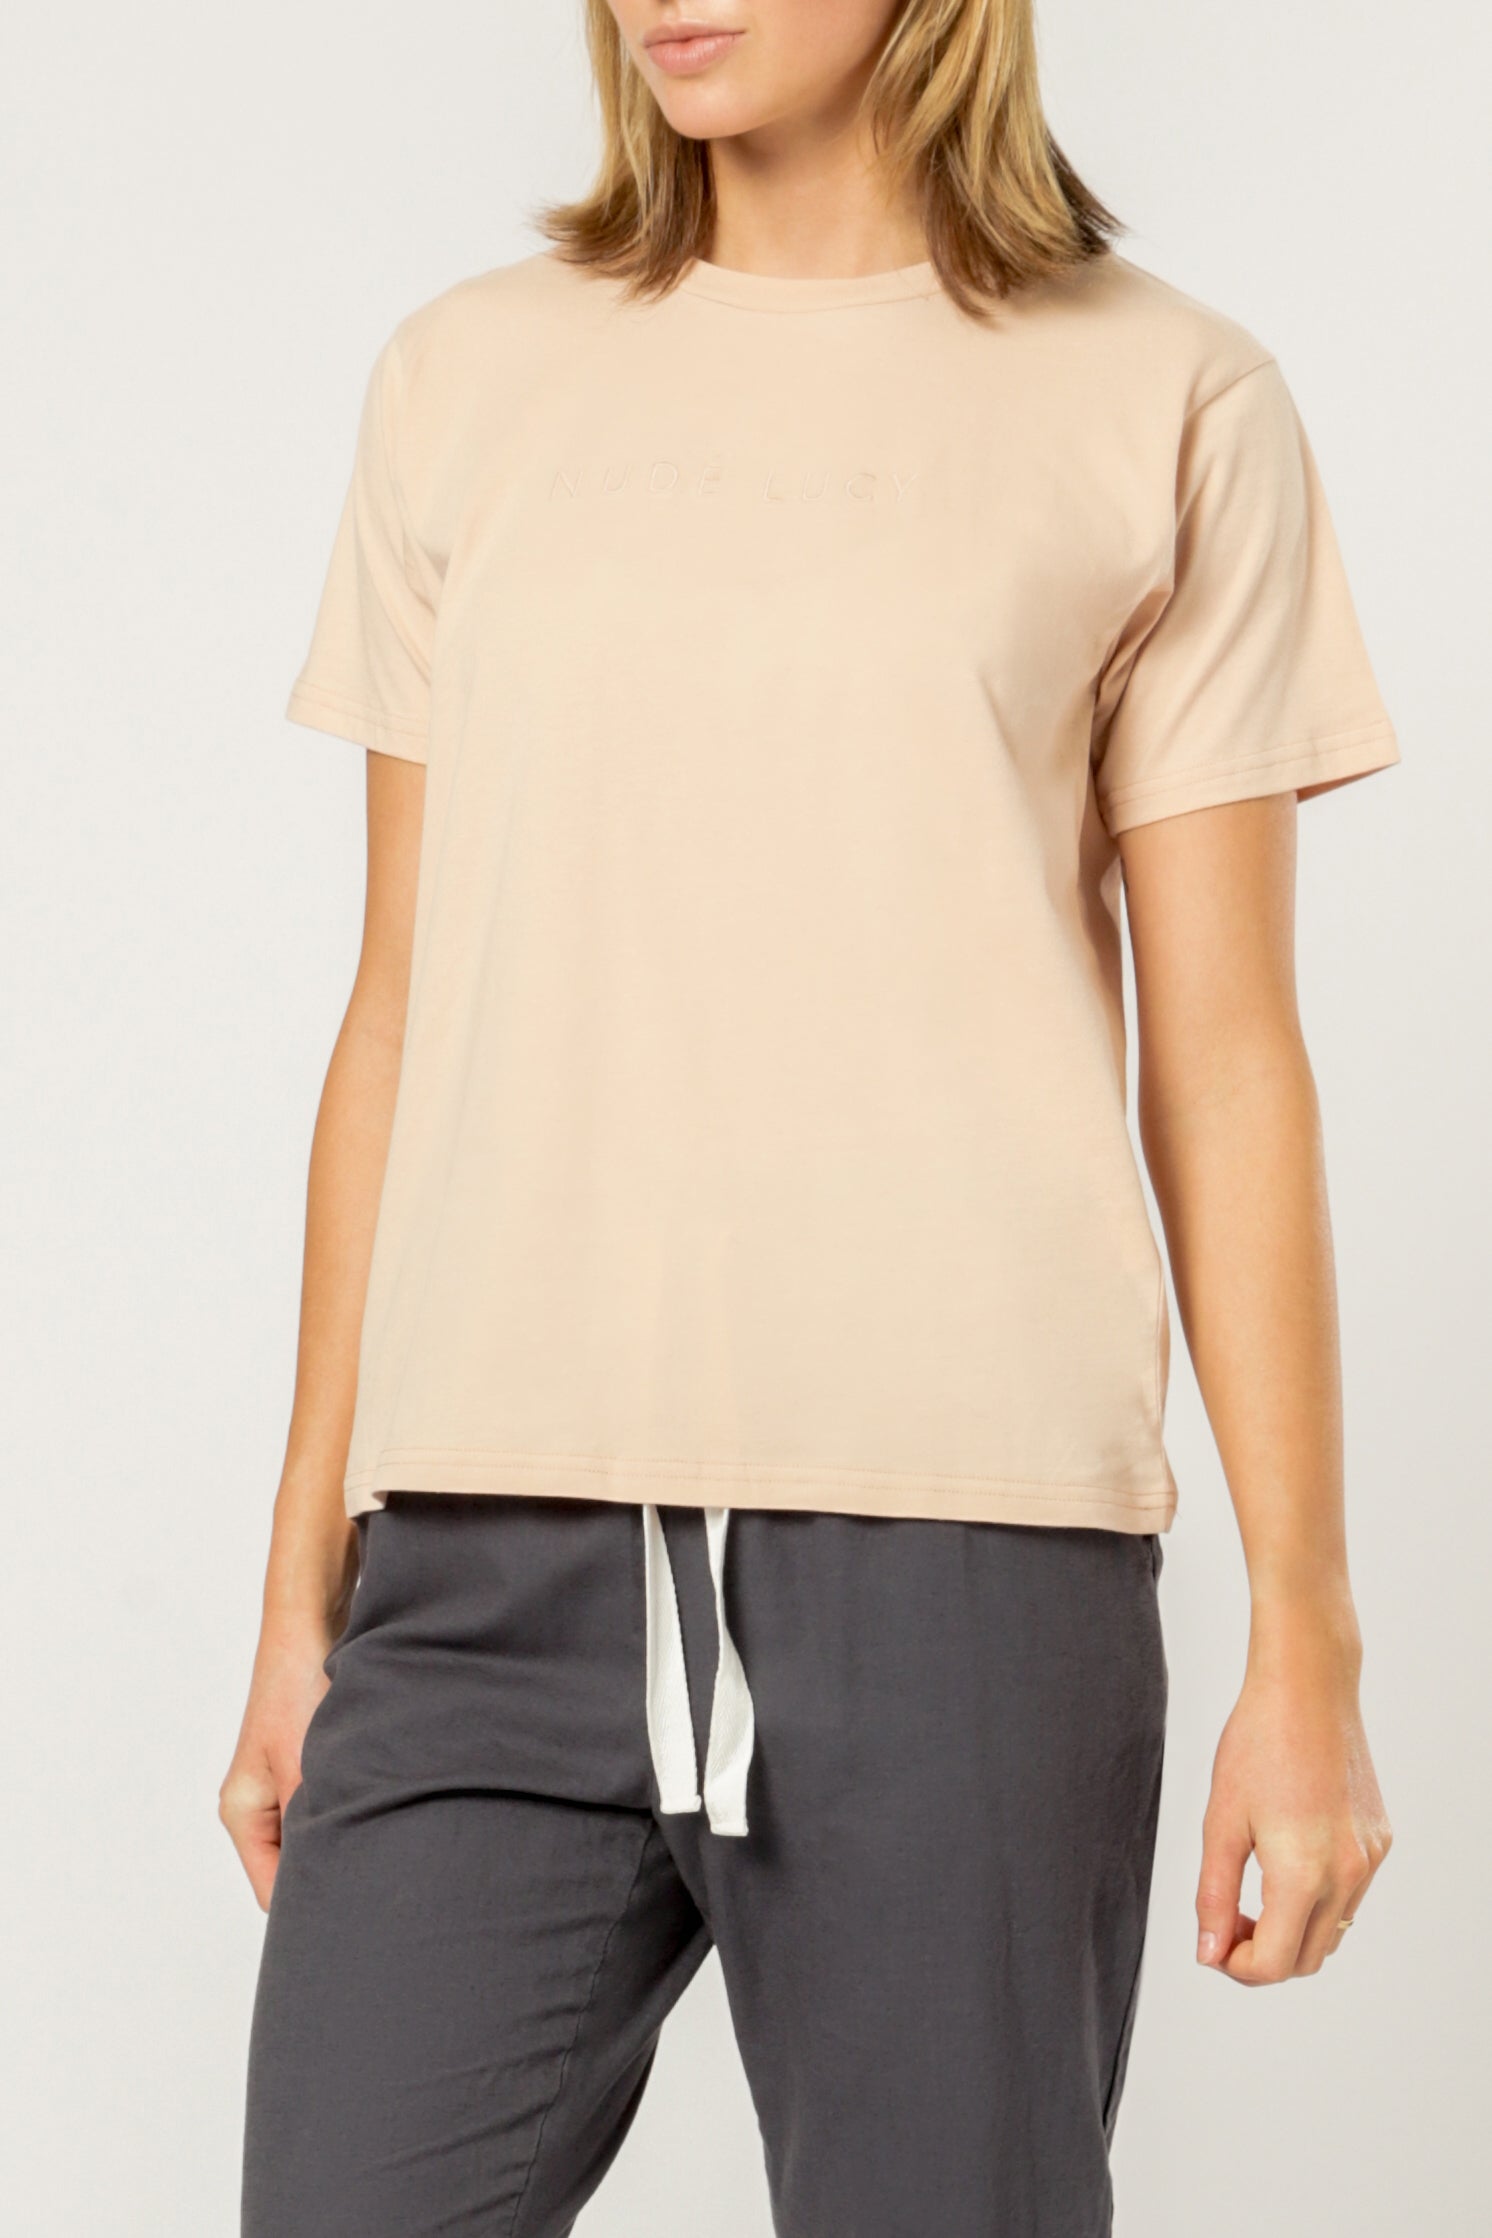 Nude Lucy Nude Lucy embr slogan tee blush t shirt